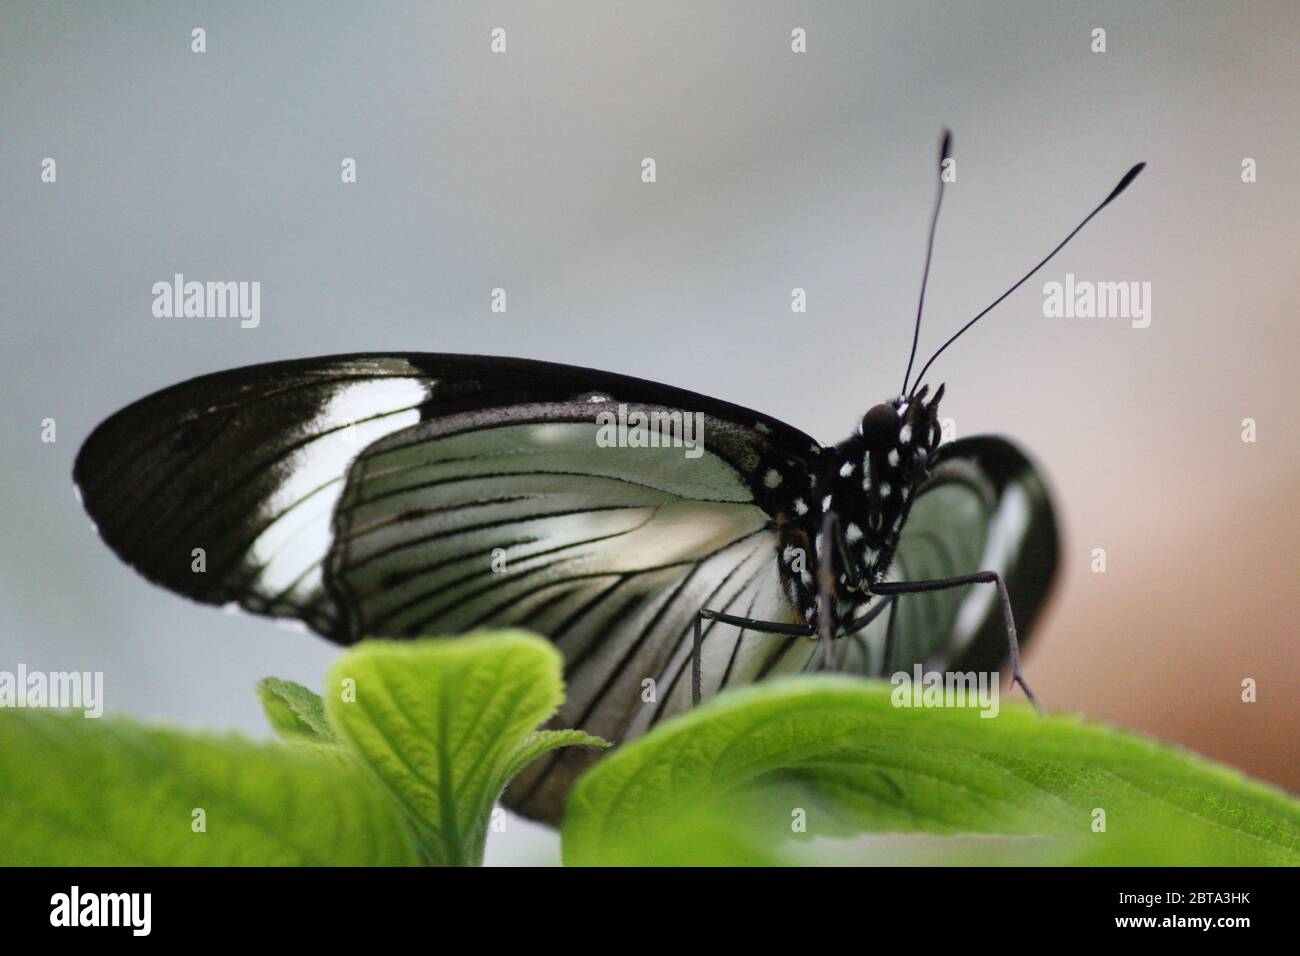 The great Mormon butterfly Stock Photo